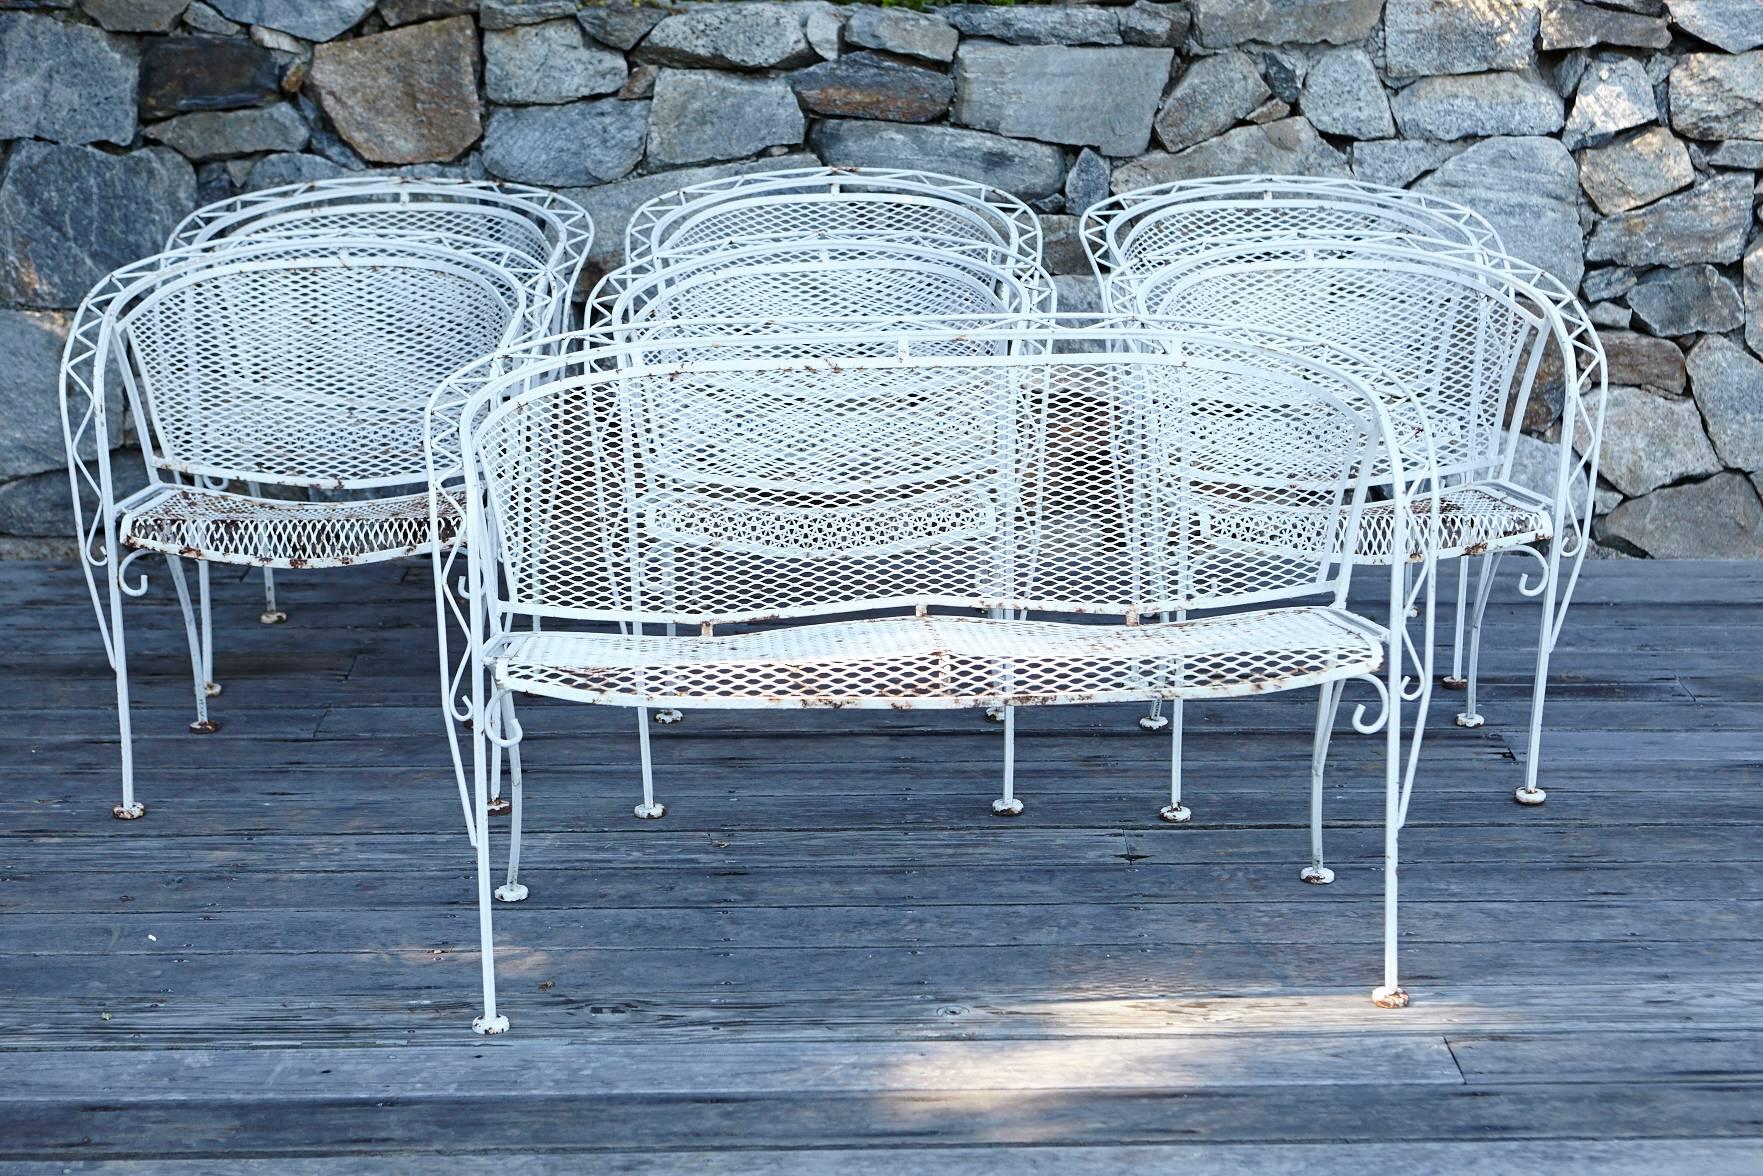 Complete Mid-Century Modern iron patio set with sculpted frame, barrel back rests and angled legs. Six chairs, one large out door dining table and a loveseat.
The set is in good sturdy condition, structurally sound, no breaks, welds or repairs. The